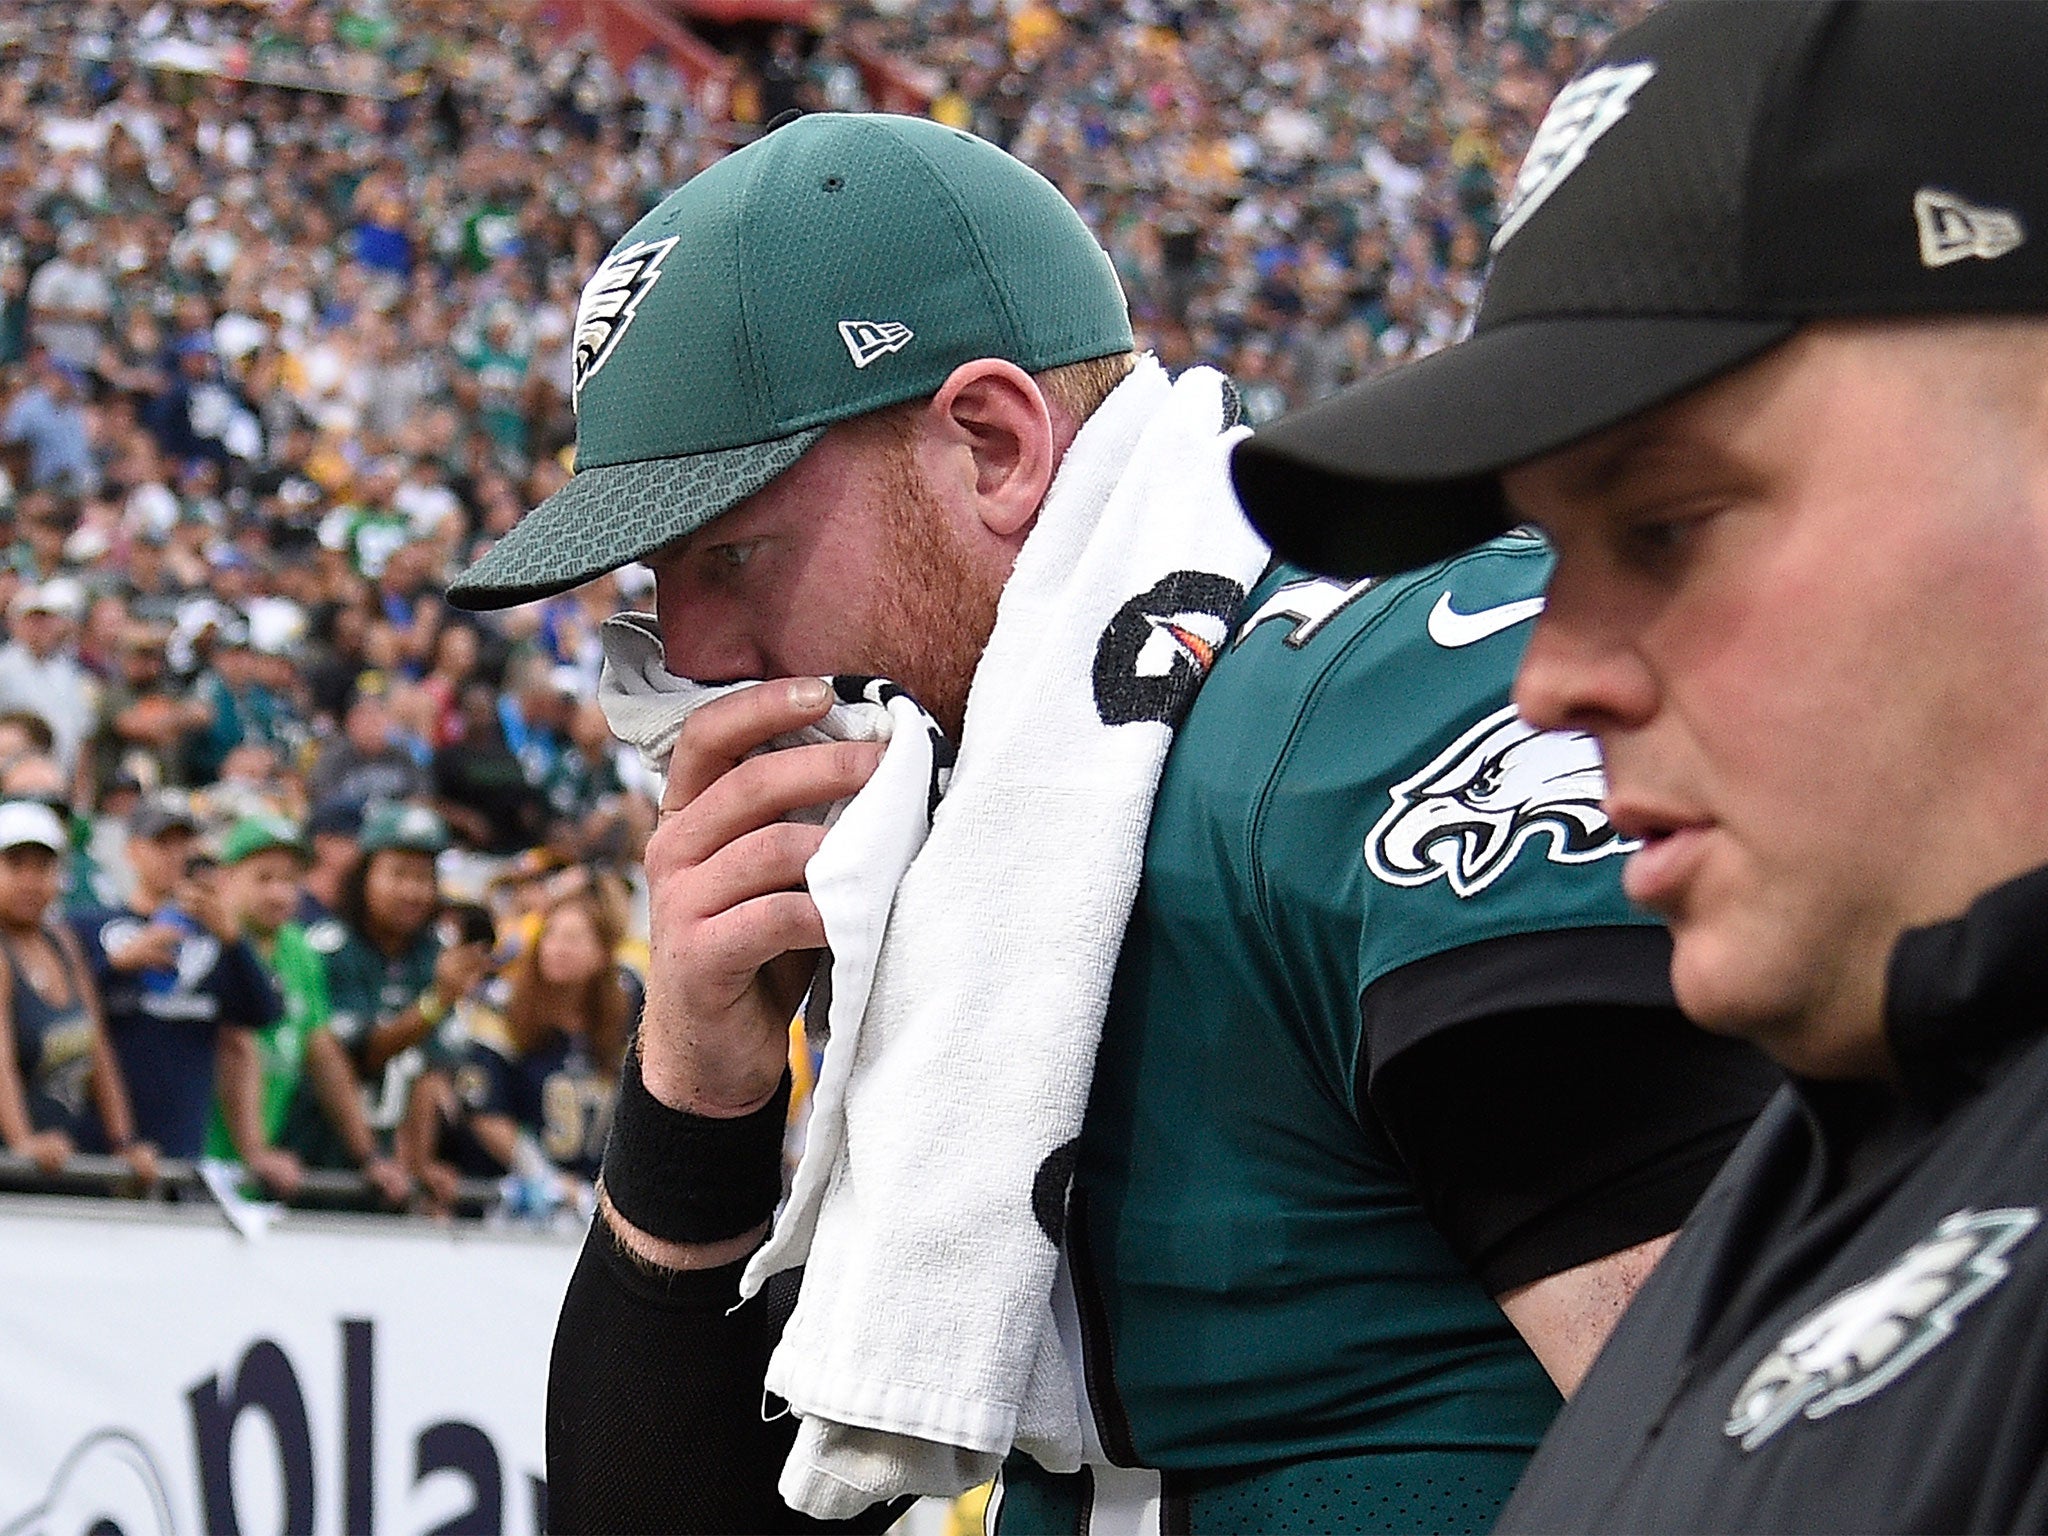 Carson Wentz leaves the field, ending a season in which he has been the league's standout player